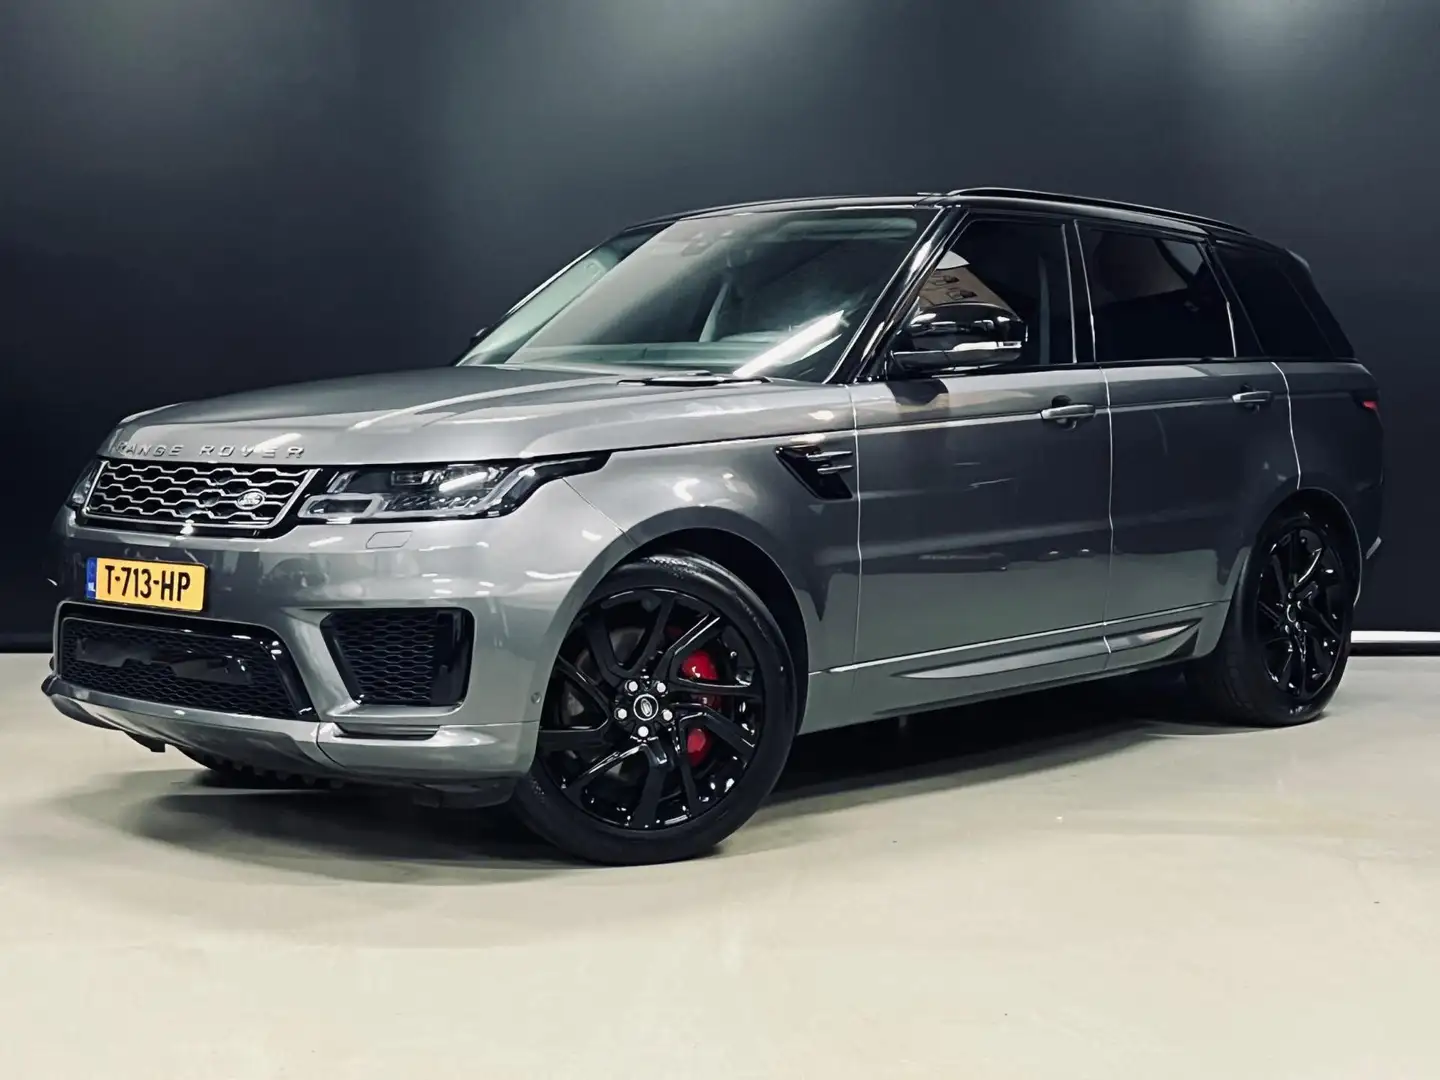 Land Rover Range Rover Sport 2.0 P400e HSE Autobiography Dynamic, Pano, Luchtve Grey - 1